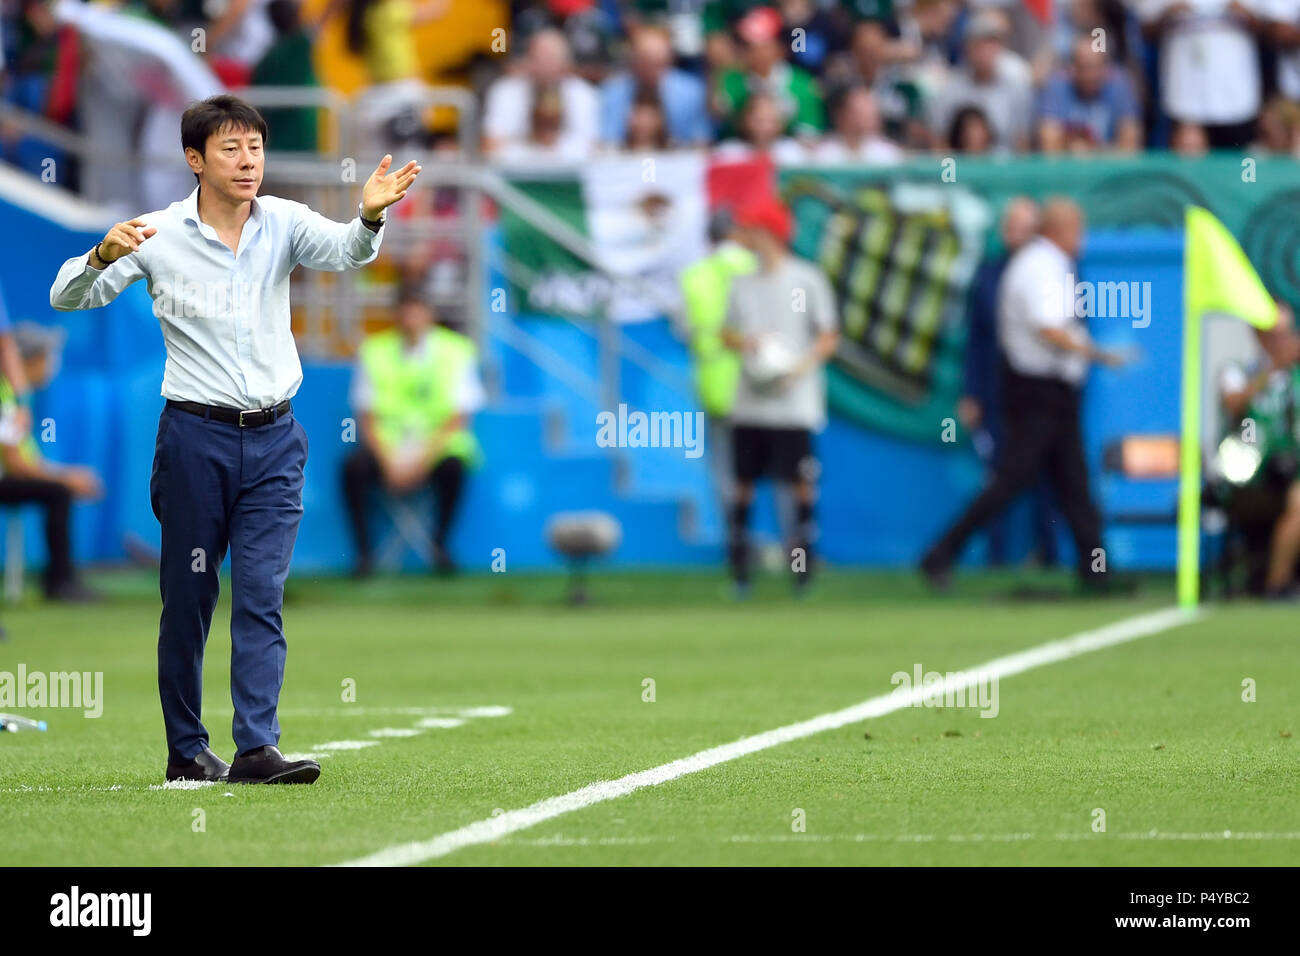 Rostov-on-Don, Russia. 23rd June, 2018. Soccer, FIFA World Cup 2018, South Korea vs Mexico, group stages, Group F, 2nd matchday at the Rostov-on-Don Stadium. Coach Taeyong Shin (Tae-Yong Shin) from South Korea gives instructions. Credit: Marius Becker/dpa/Alamy Live News Credit: dpa picture alliance/Alamy Live News Stock Photo